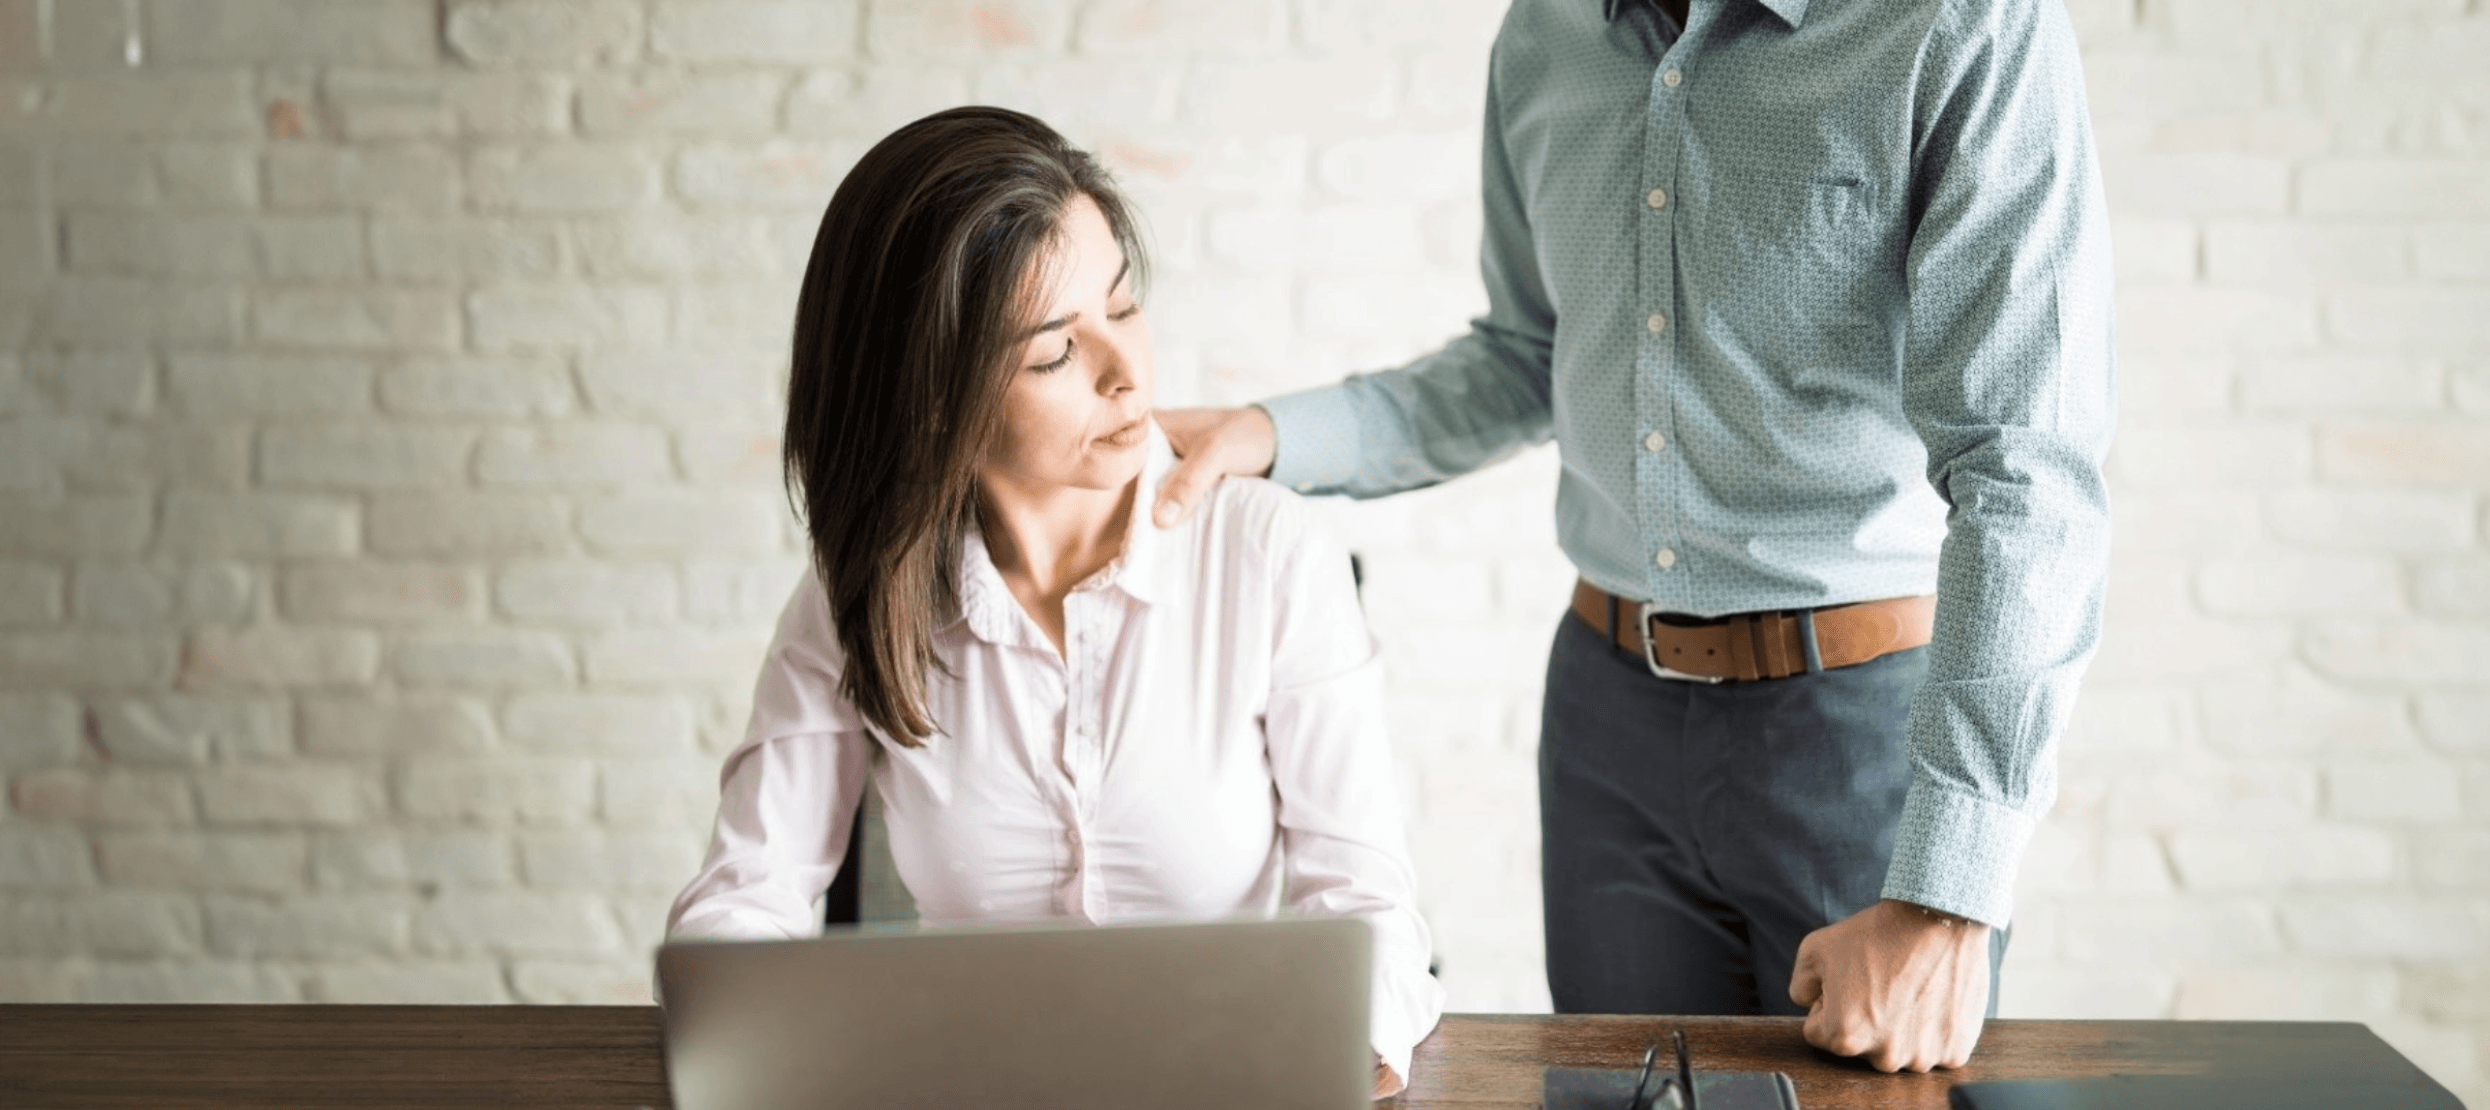 Understanding the Speak Out Act and Workplace Harassment Impact